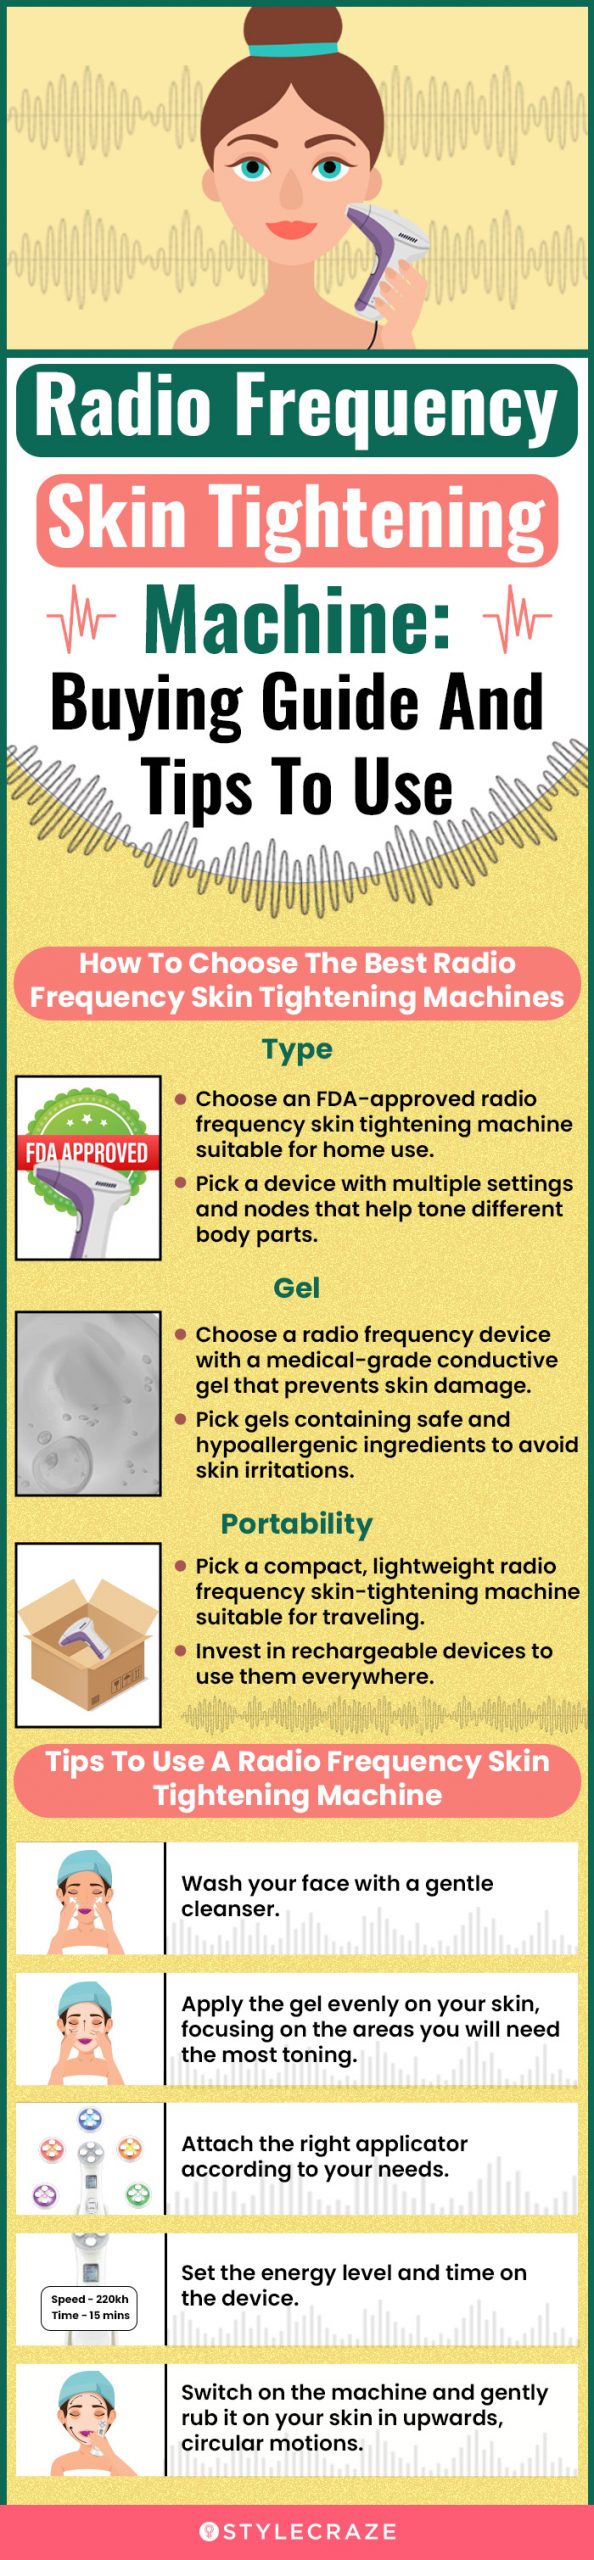 Radio Frequency Skin Tightening Machine: Buying Guide And Tips To Use (infographic)